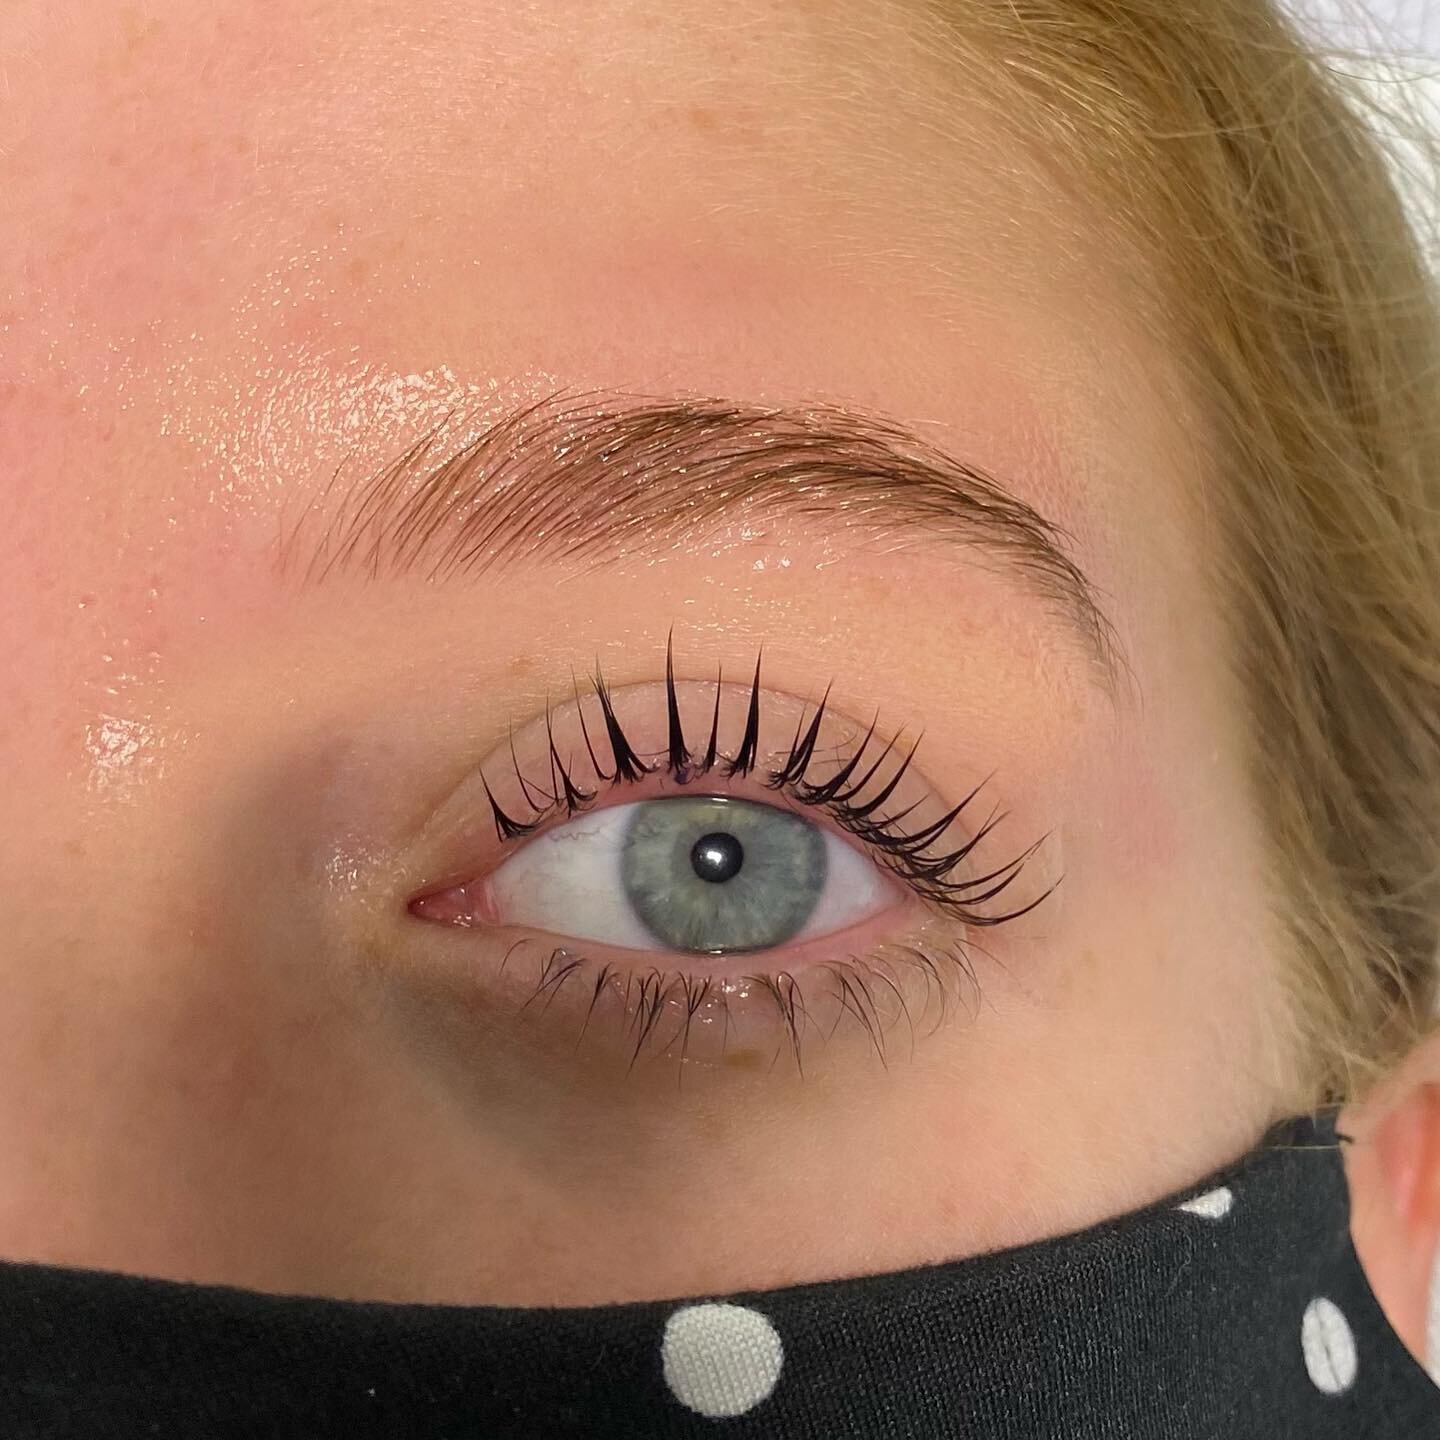 Brow shaping + a lash lift! A winning combo ✨
.
.
.
#lashes #wilmingtonlashes #lashlift #brow #browshaping #browwax #wilmingtonesthetics #wilmingtonesthetician #wilmingtonnc #wilmingtonbrows